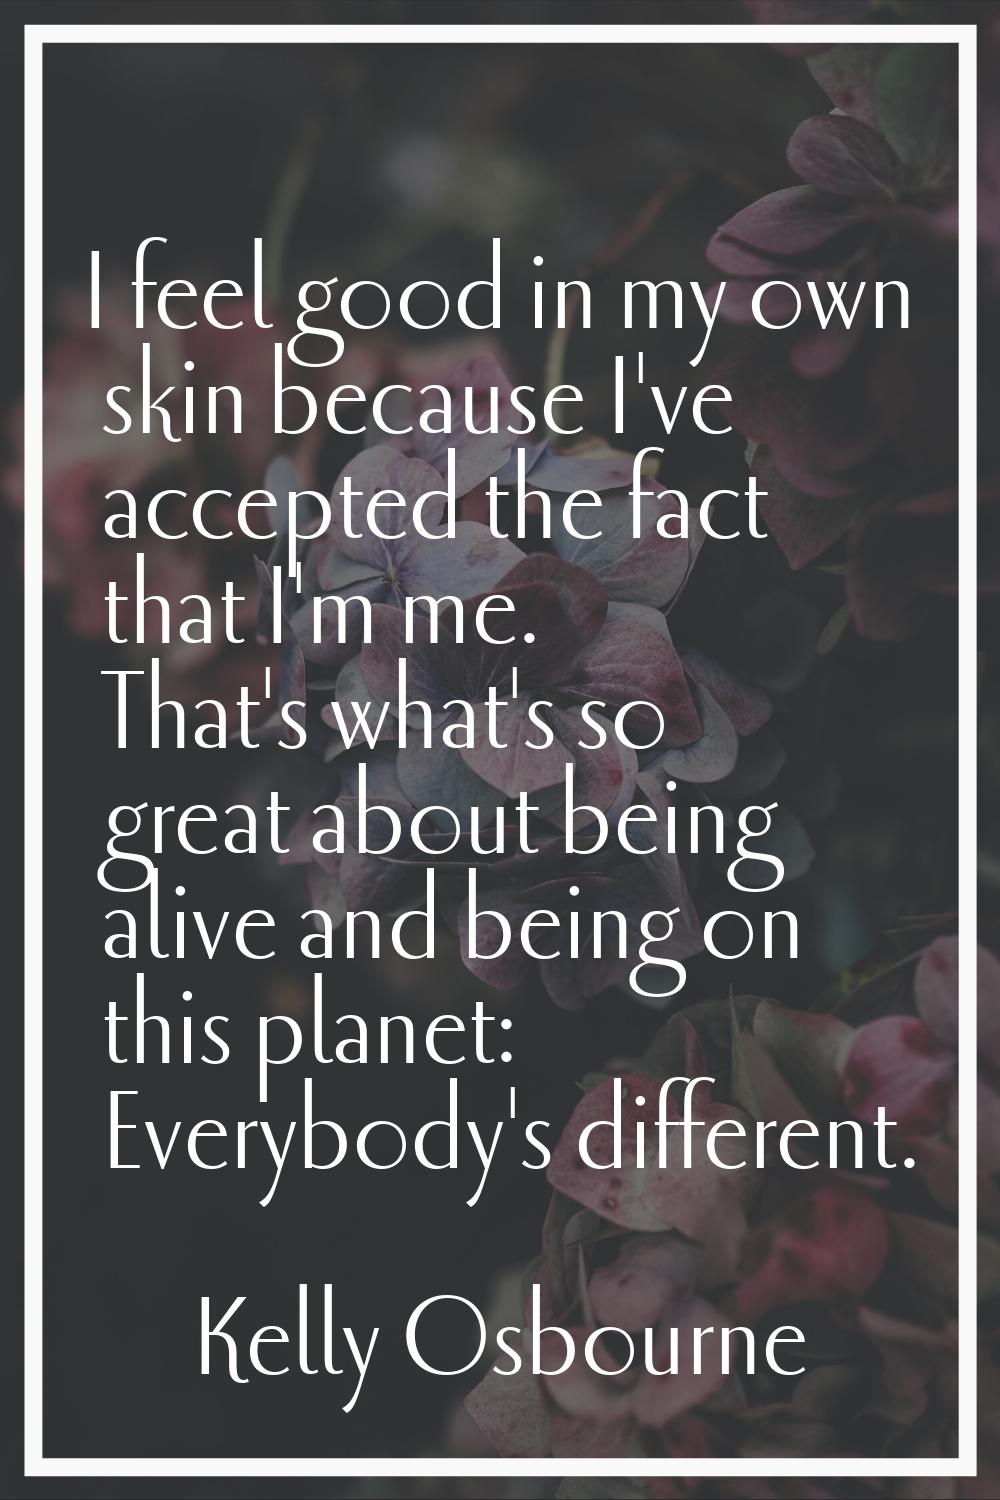 I feel good in my own skin because I've accepted the fact that I'm me. That's what's so great about